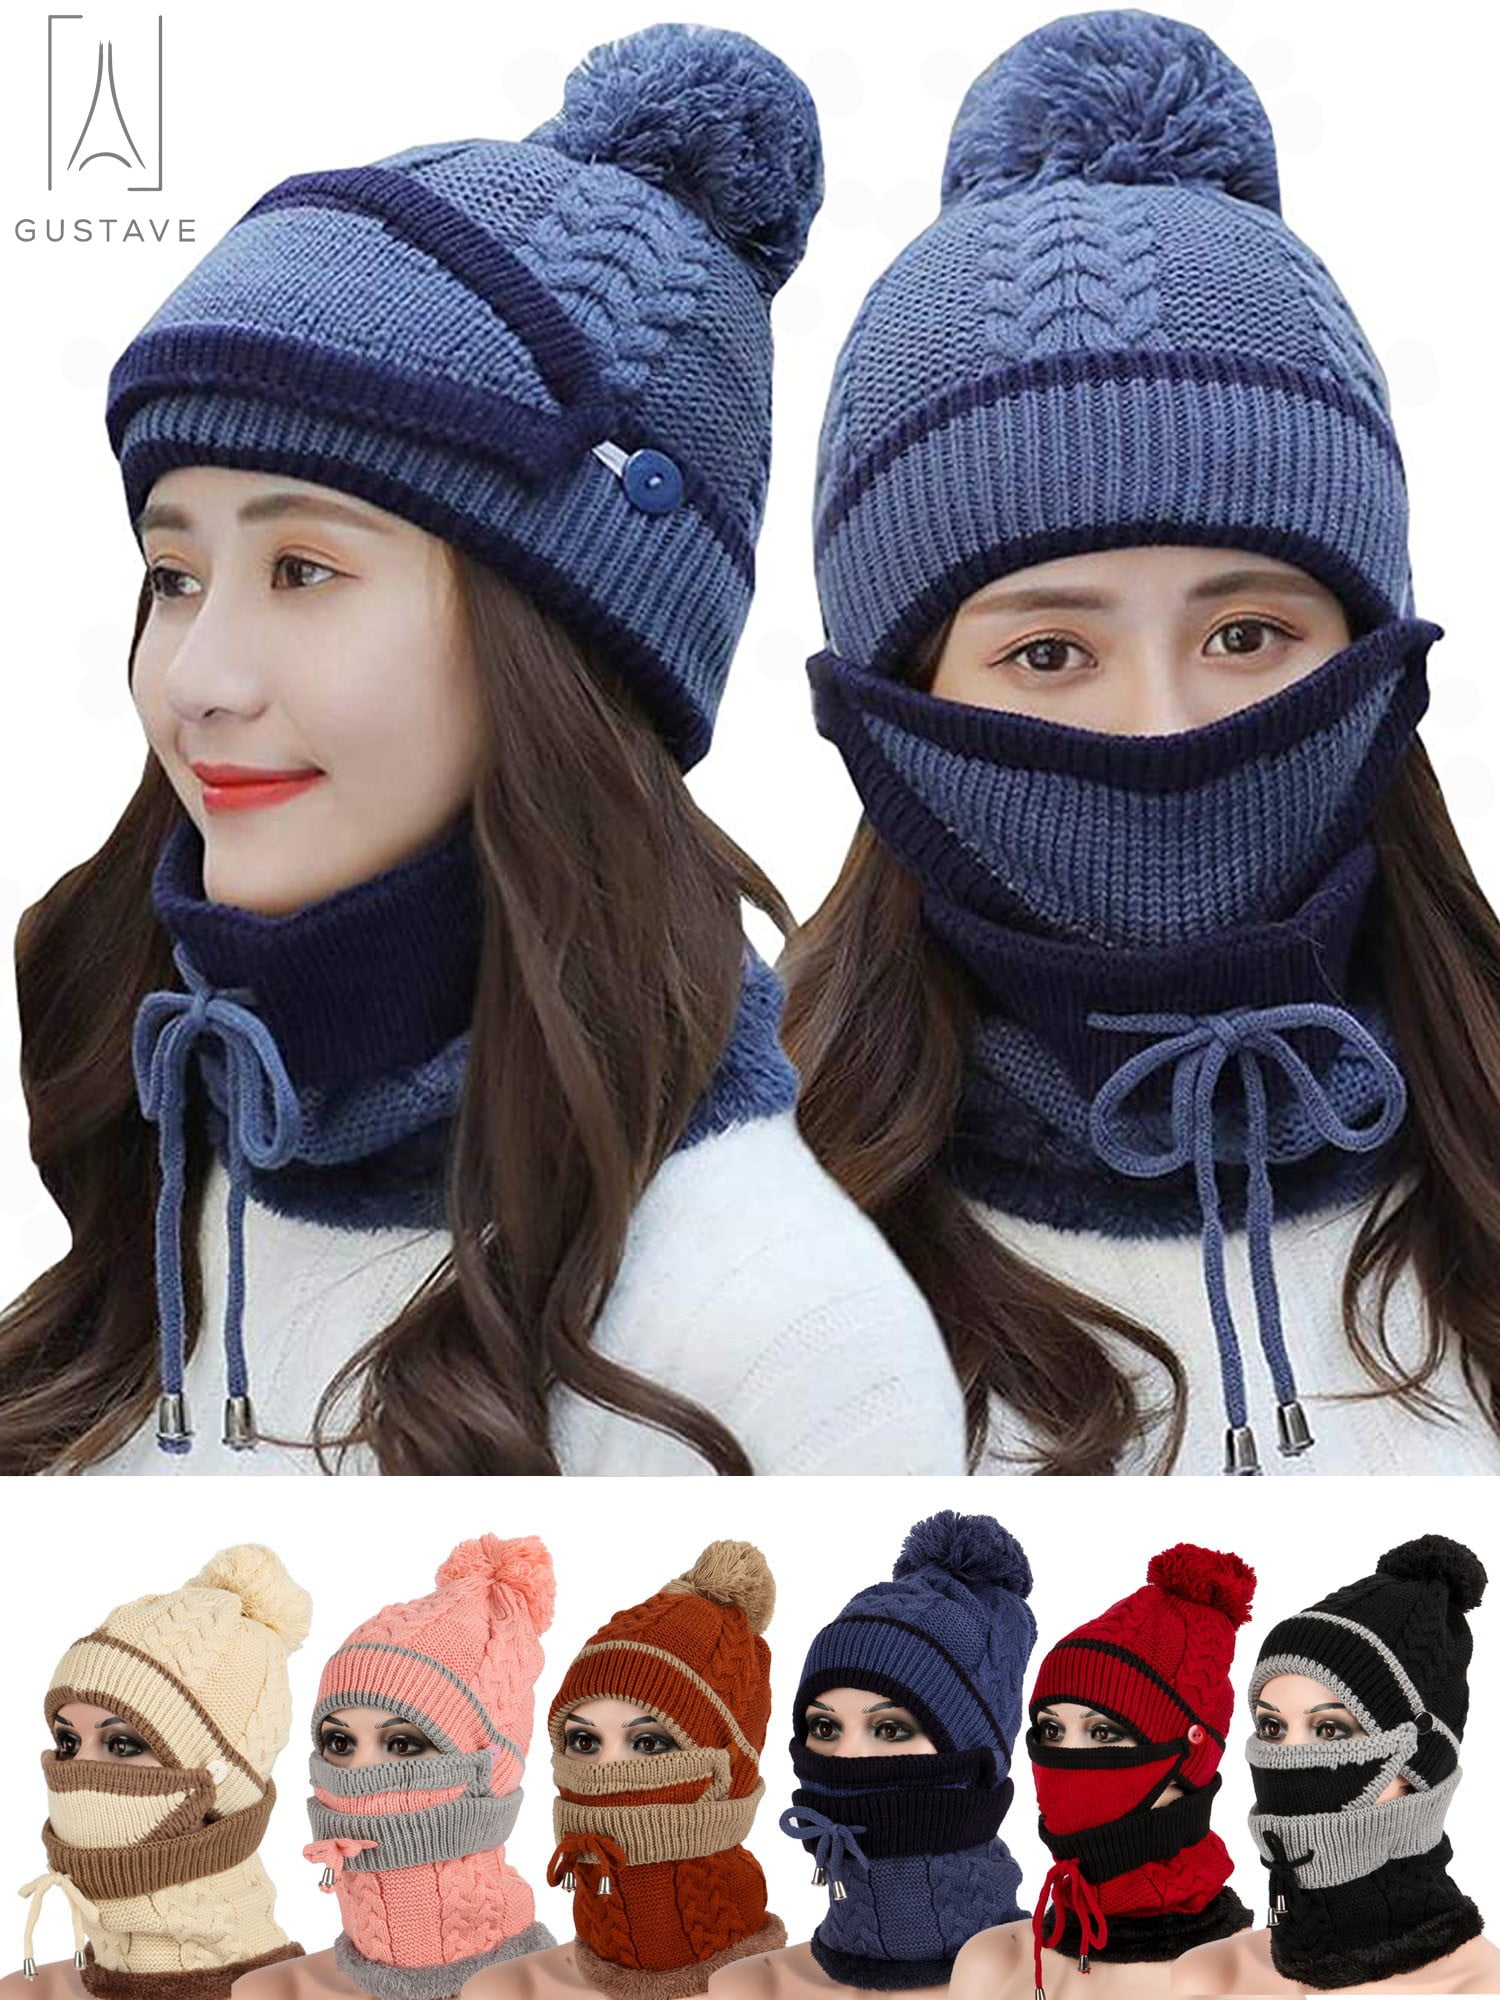 Kungber 2019 Upgrade Winter Beanie Hat Scarf Set Thick Slouchy Knit Hat Unisex Thermal Wolly Cap for Women and Men